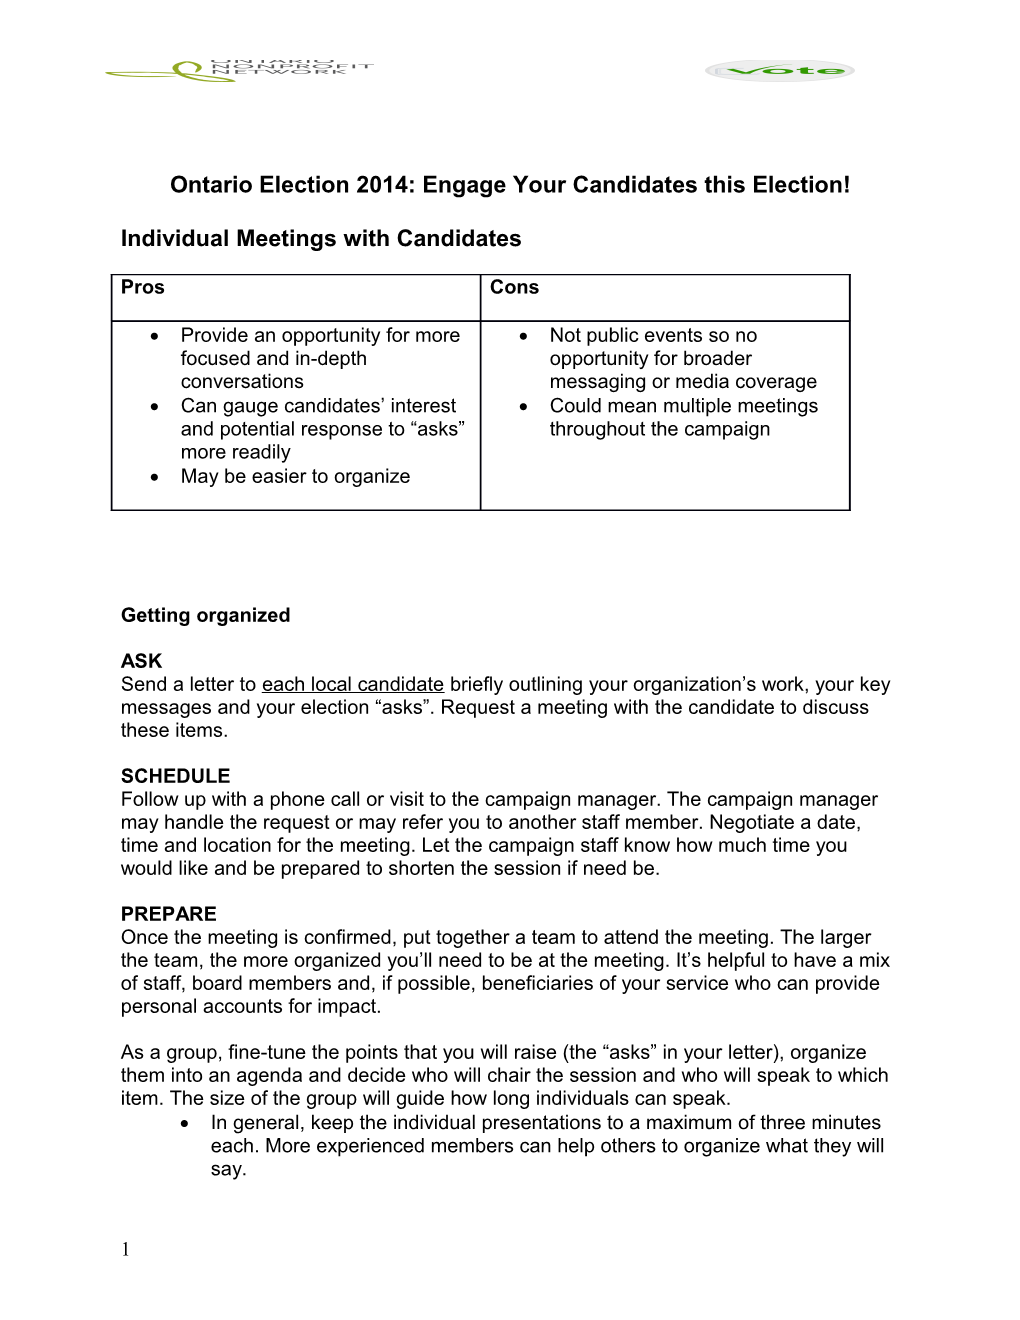 Ontario Election 2014: Engage Your Candidates This Election!